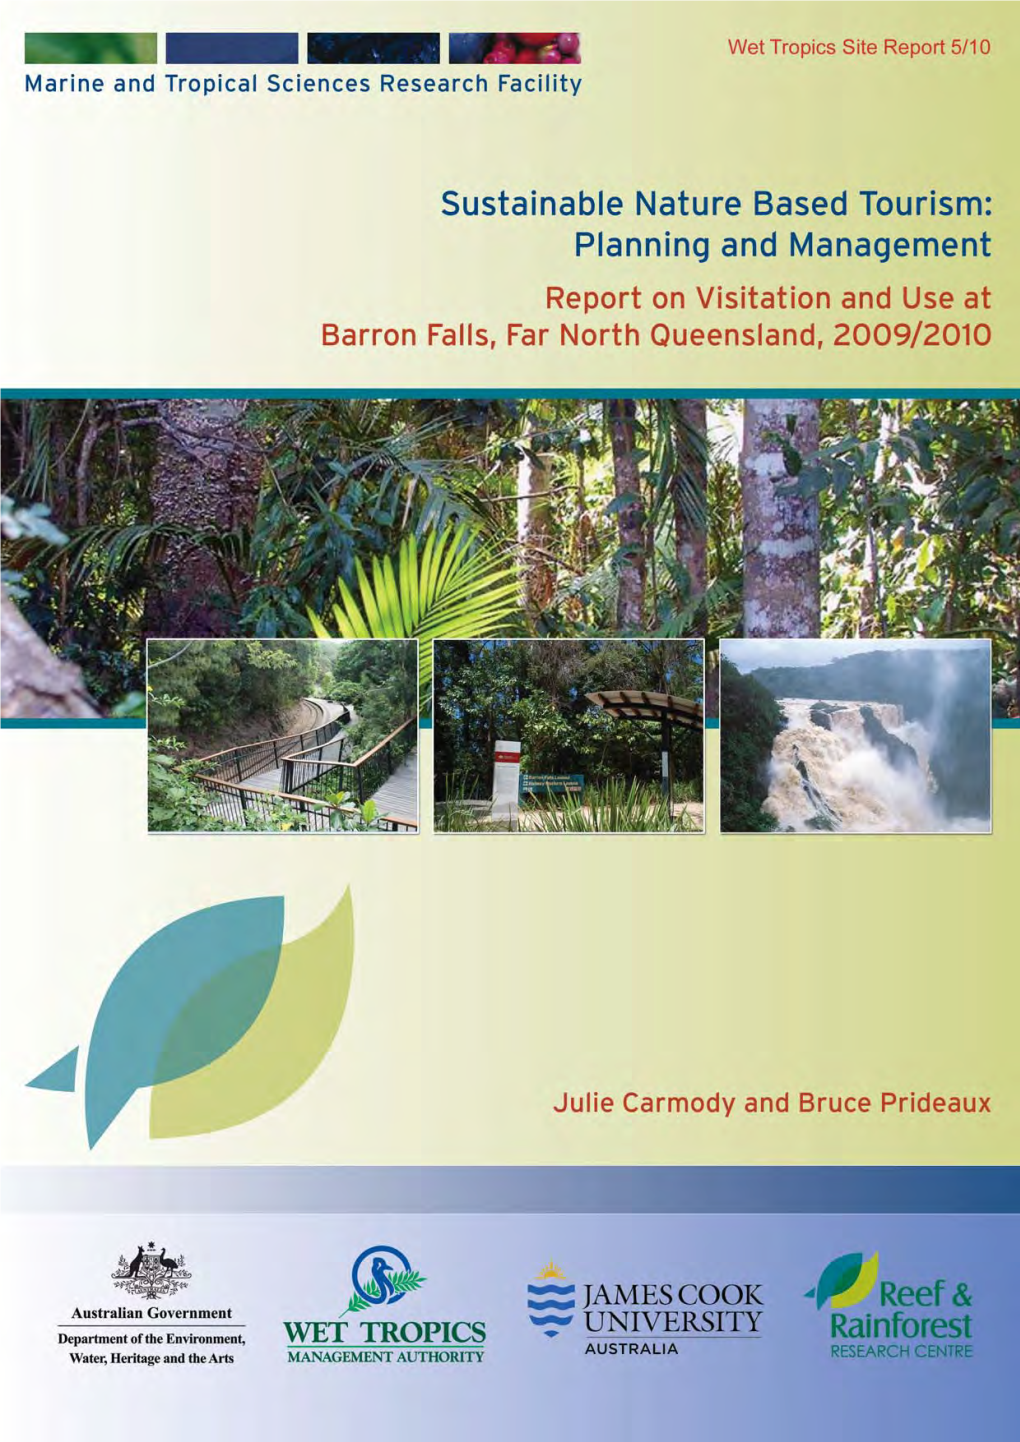 Report on Visitation and Use at Barron Falls, Far North Queensland, 2009/2010